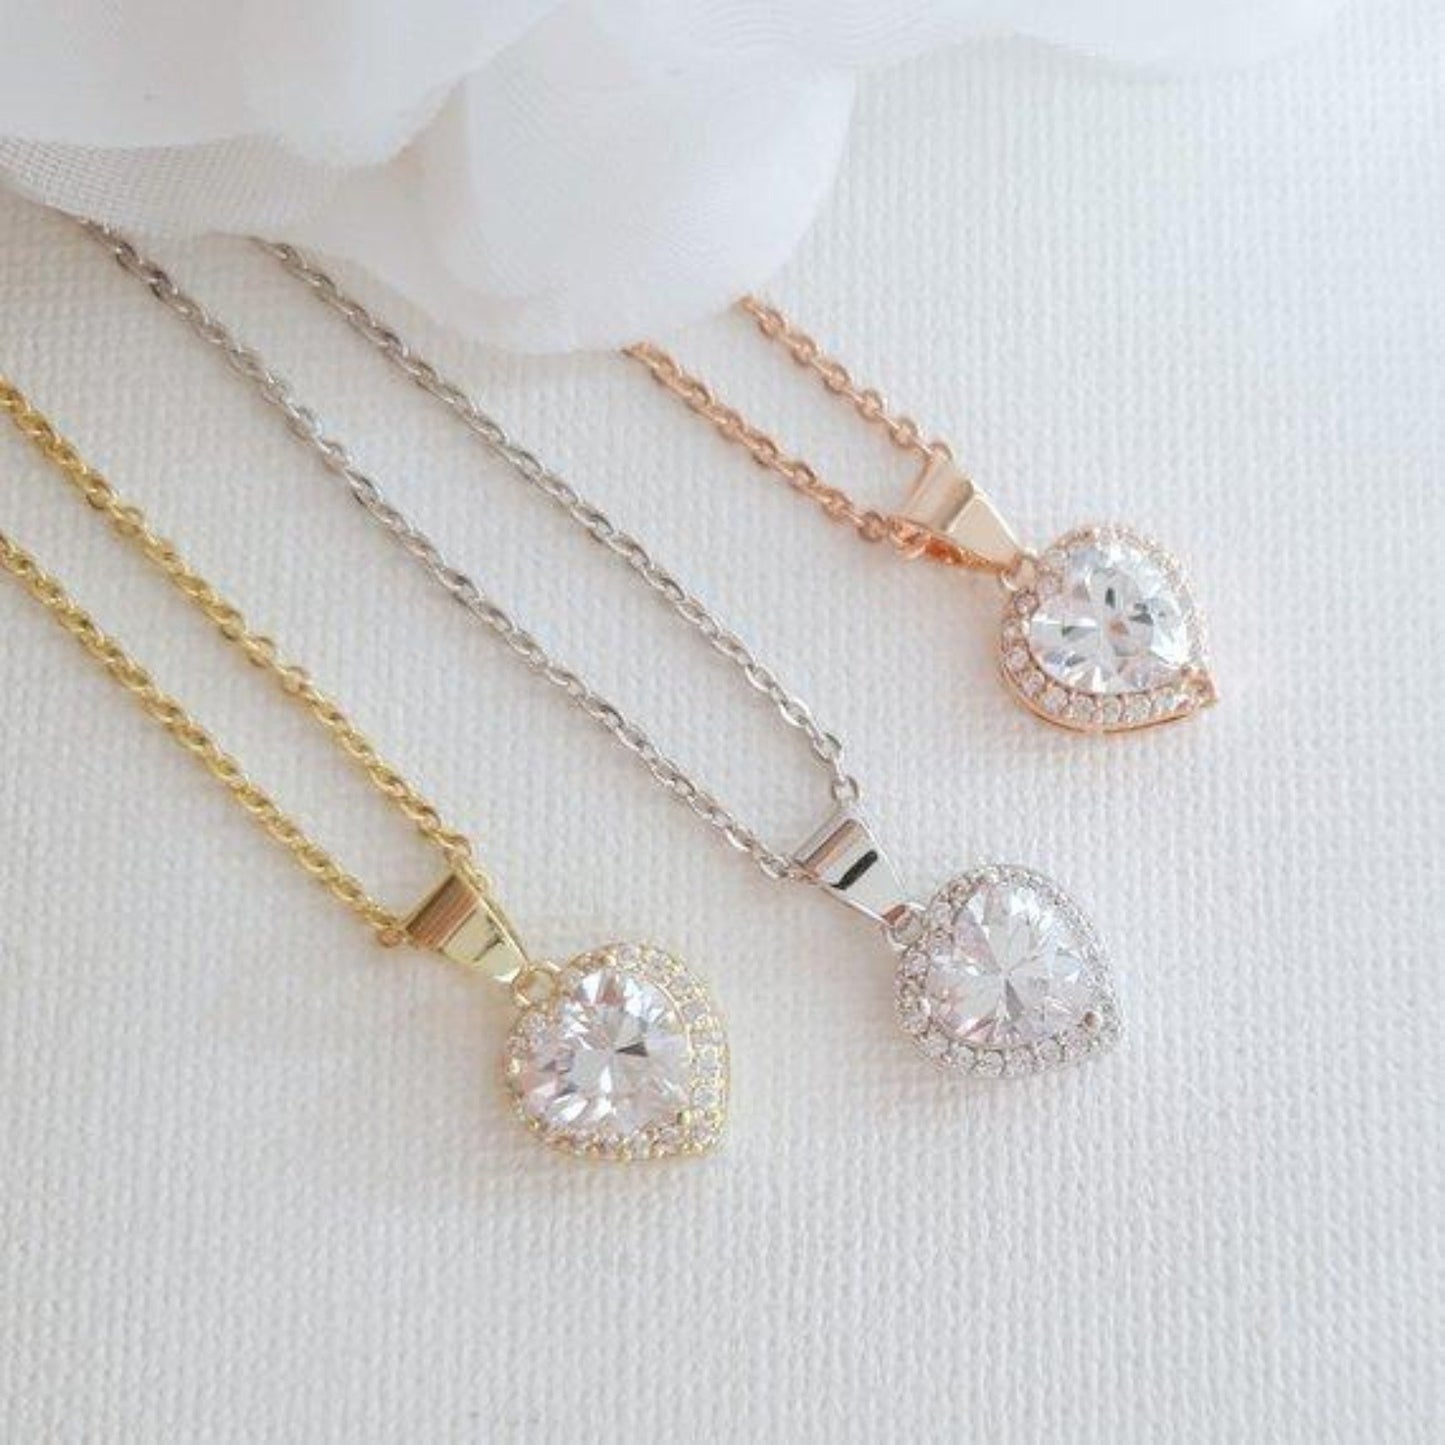 Gold Heart Necklace Set with Stud Earrings-Diana - PoetryDesigns